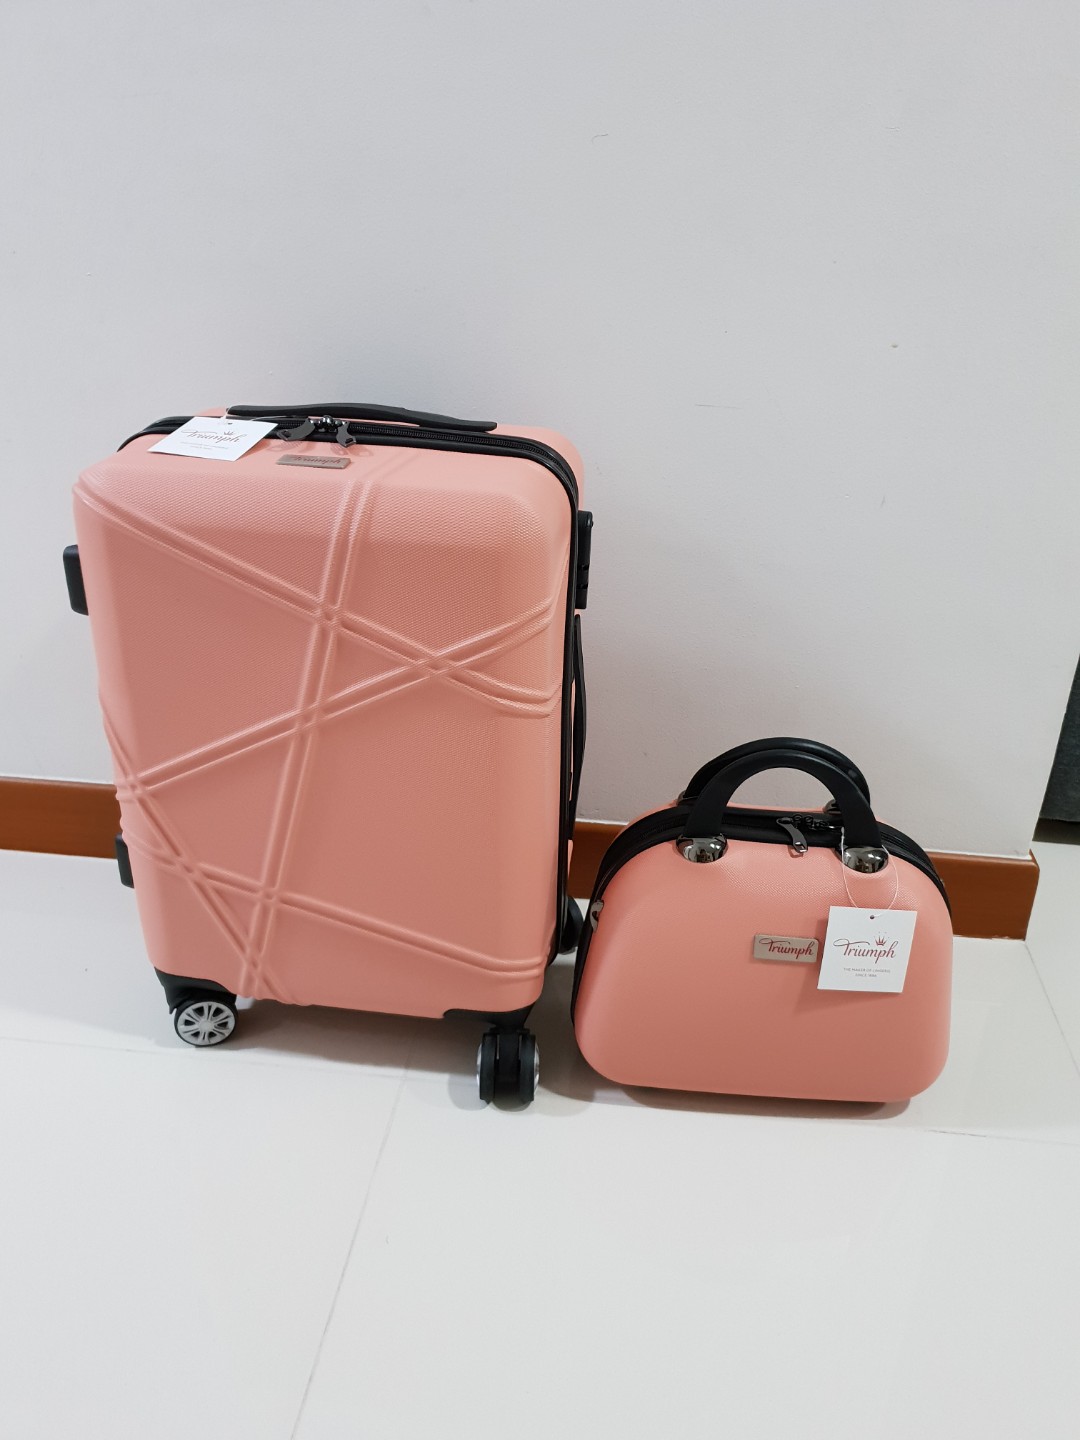 matching suitcase and hand luggage